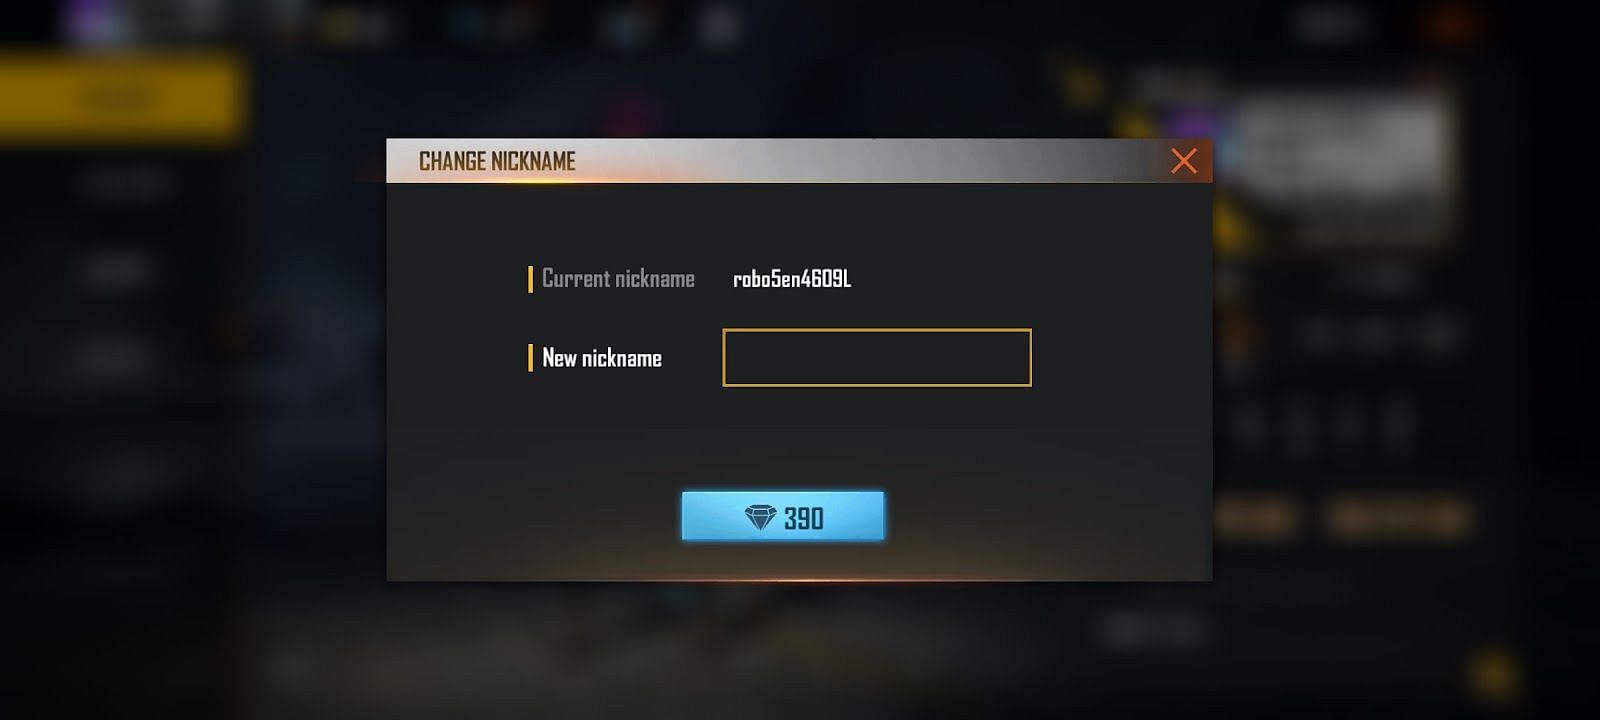 Pay 390 diamonds to get an invisible nickname (Image via Garena Free Fire)